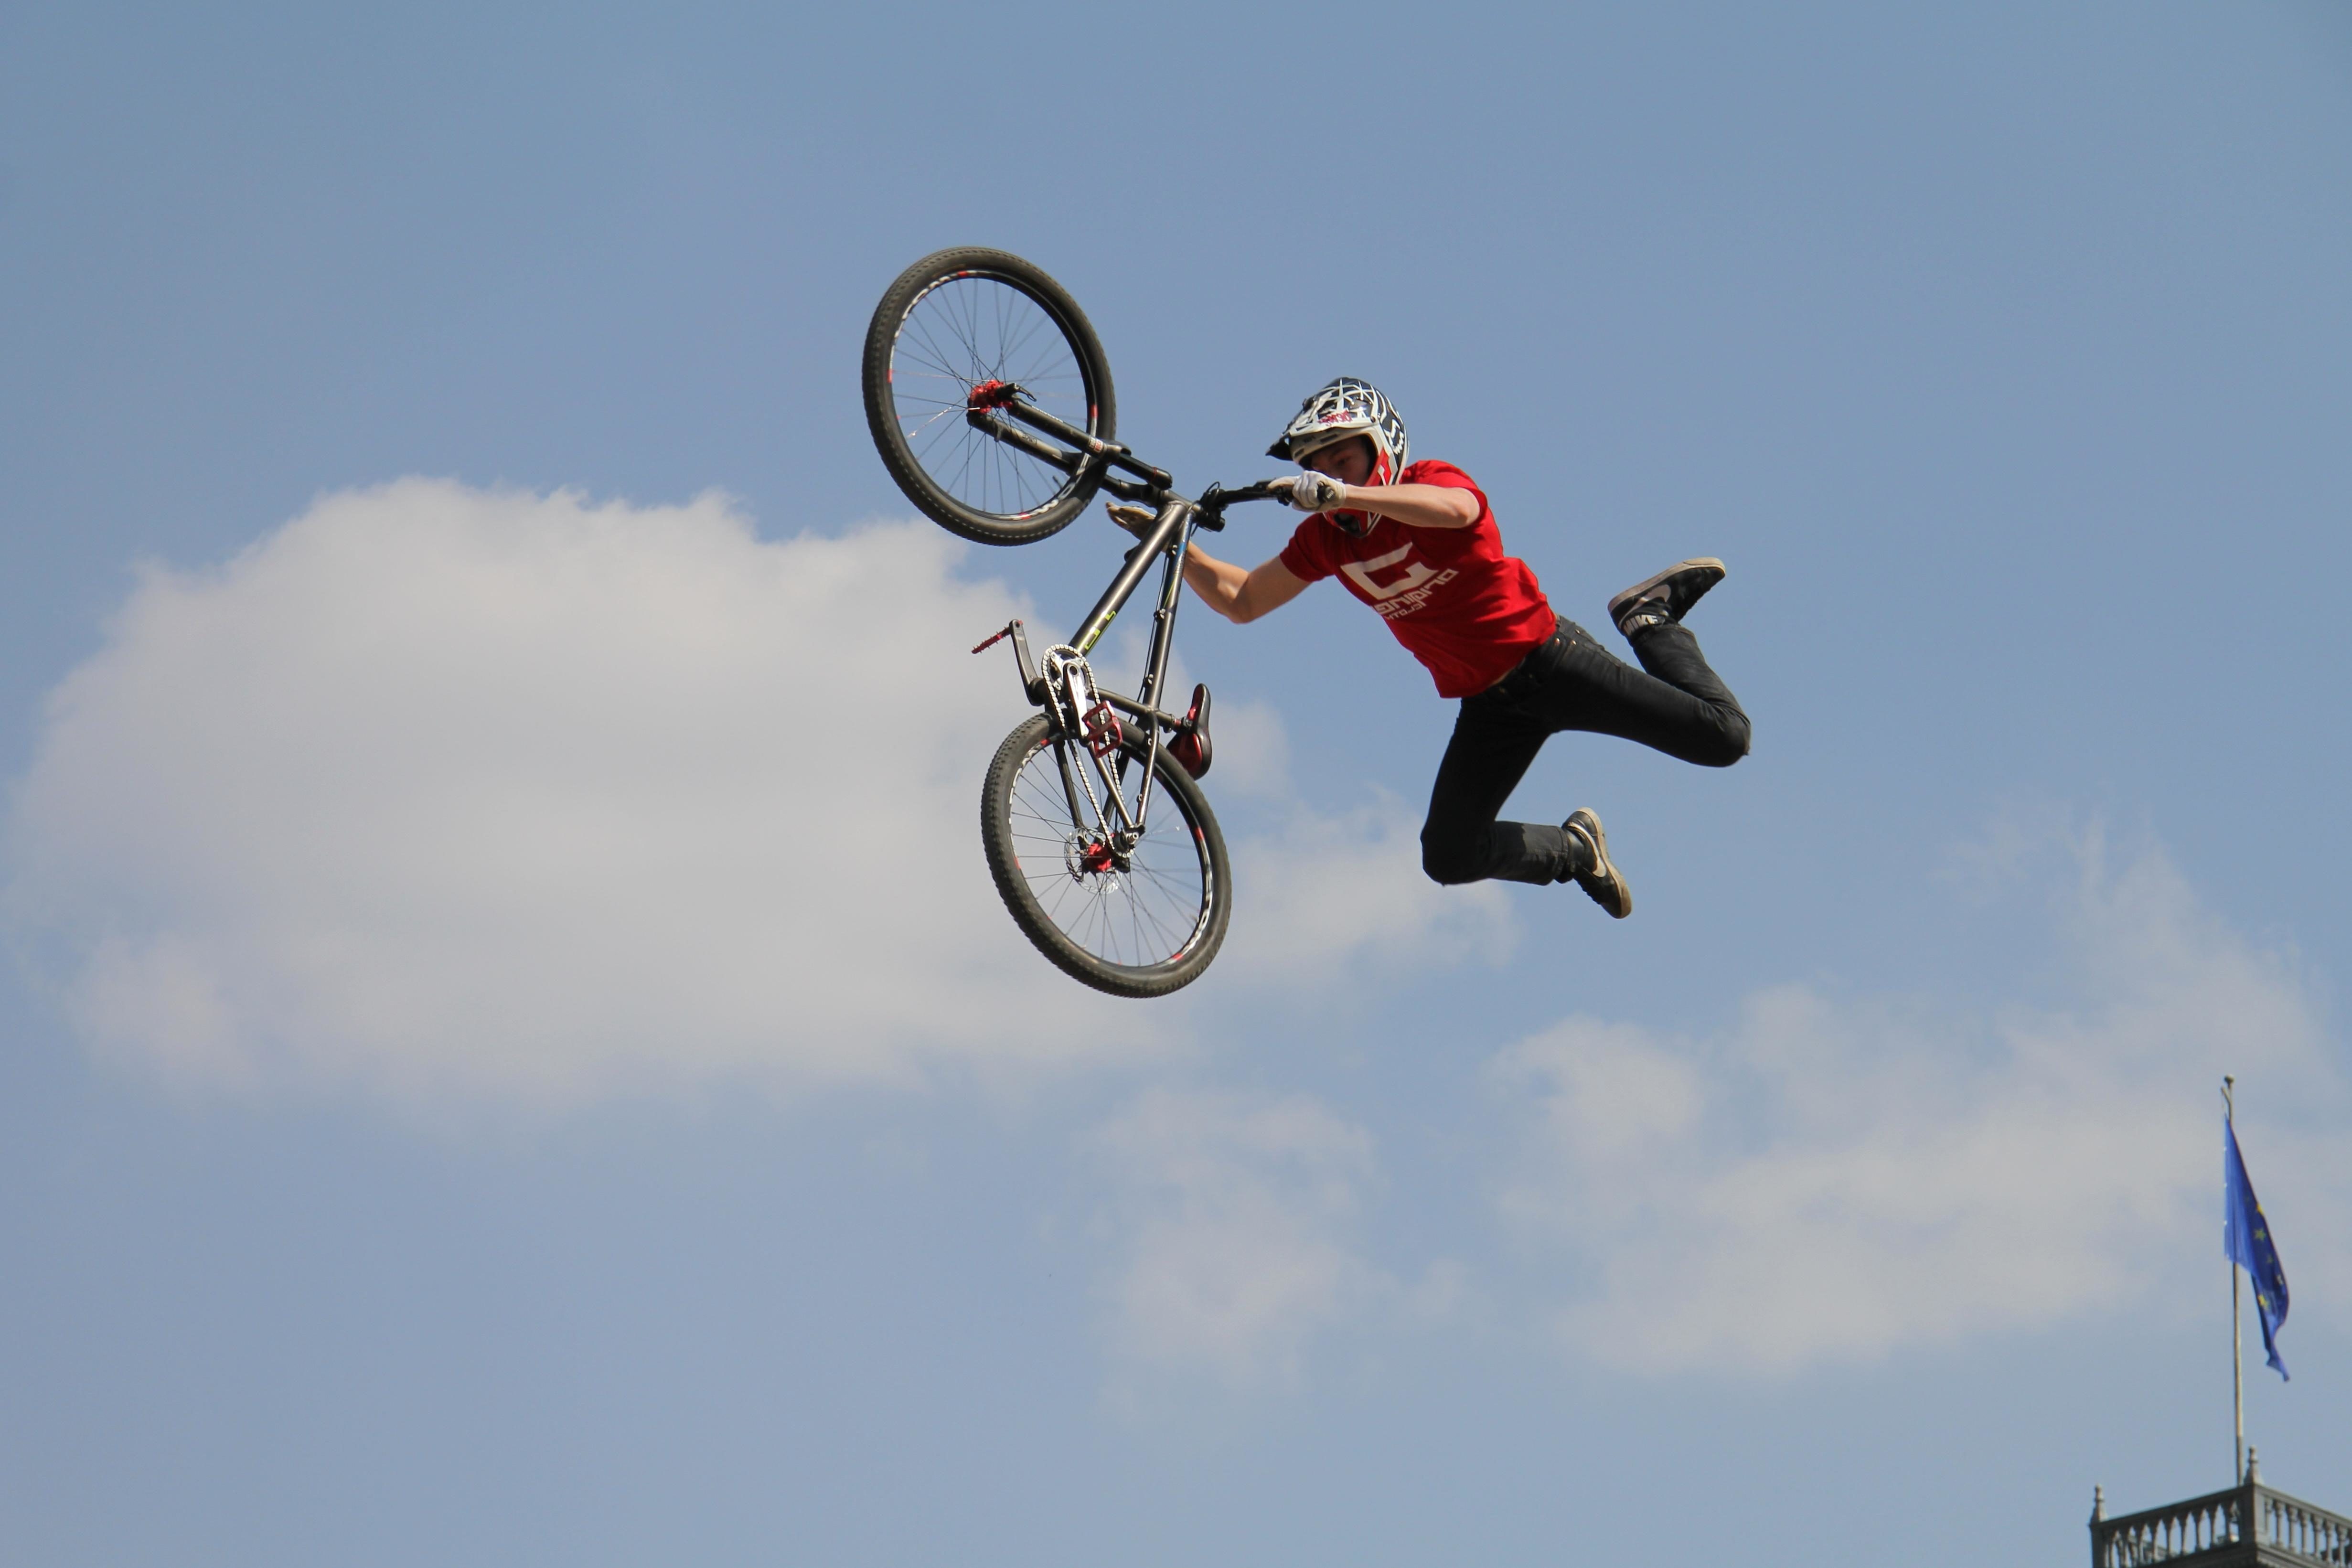 Free picture: action, mountain bike, sky, jump, competition, wheel ...